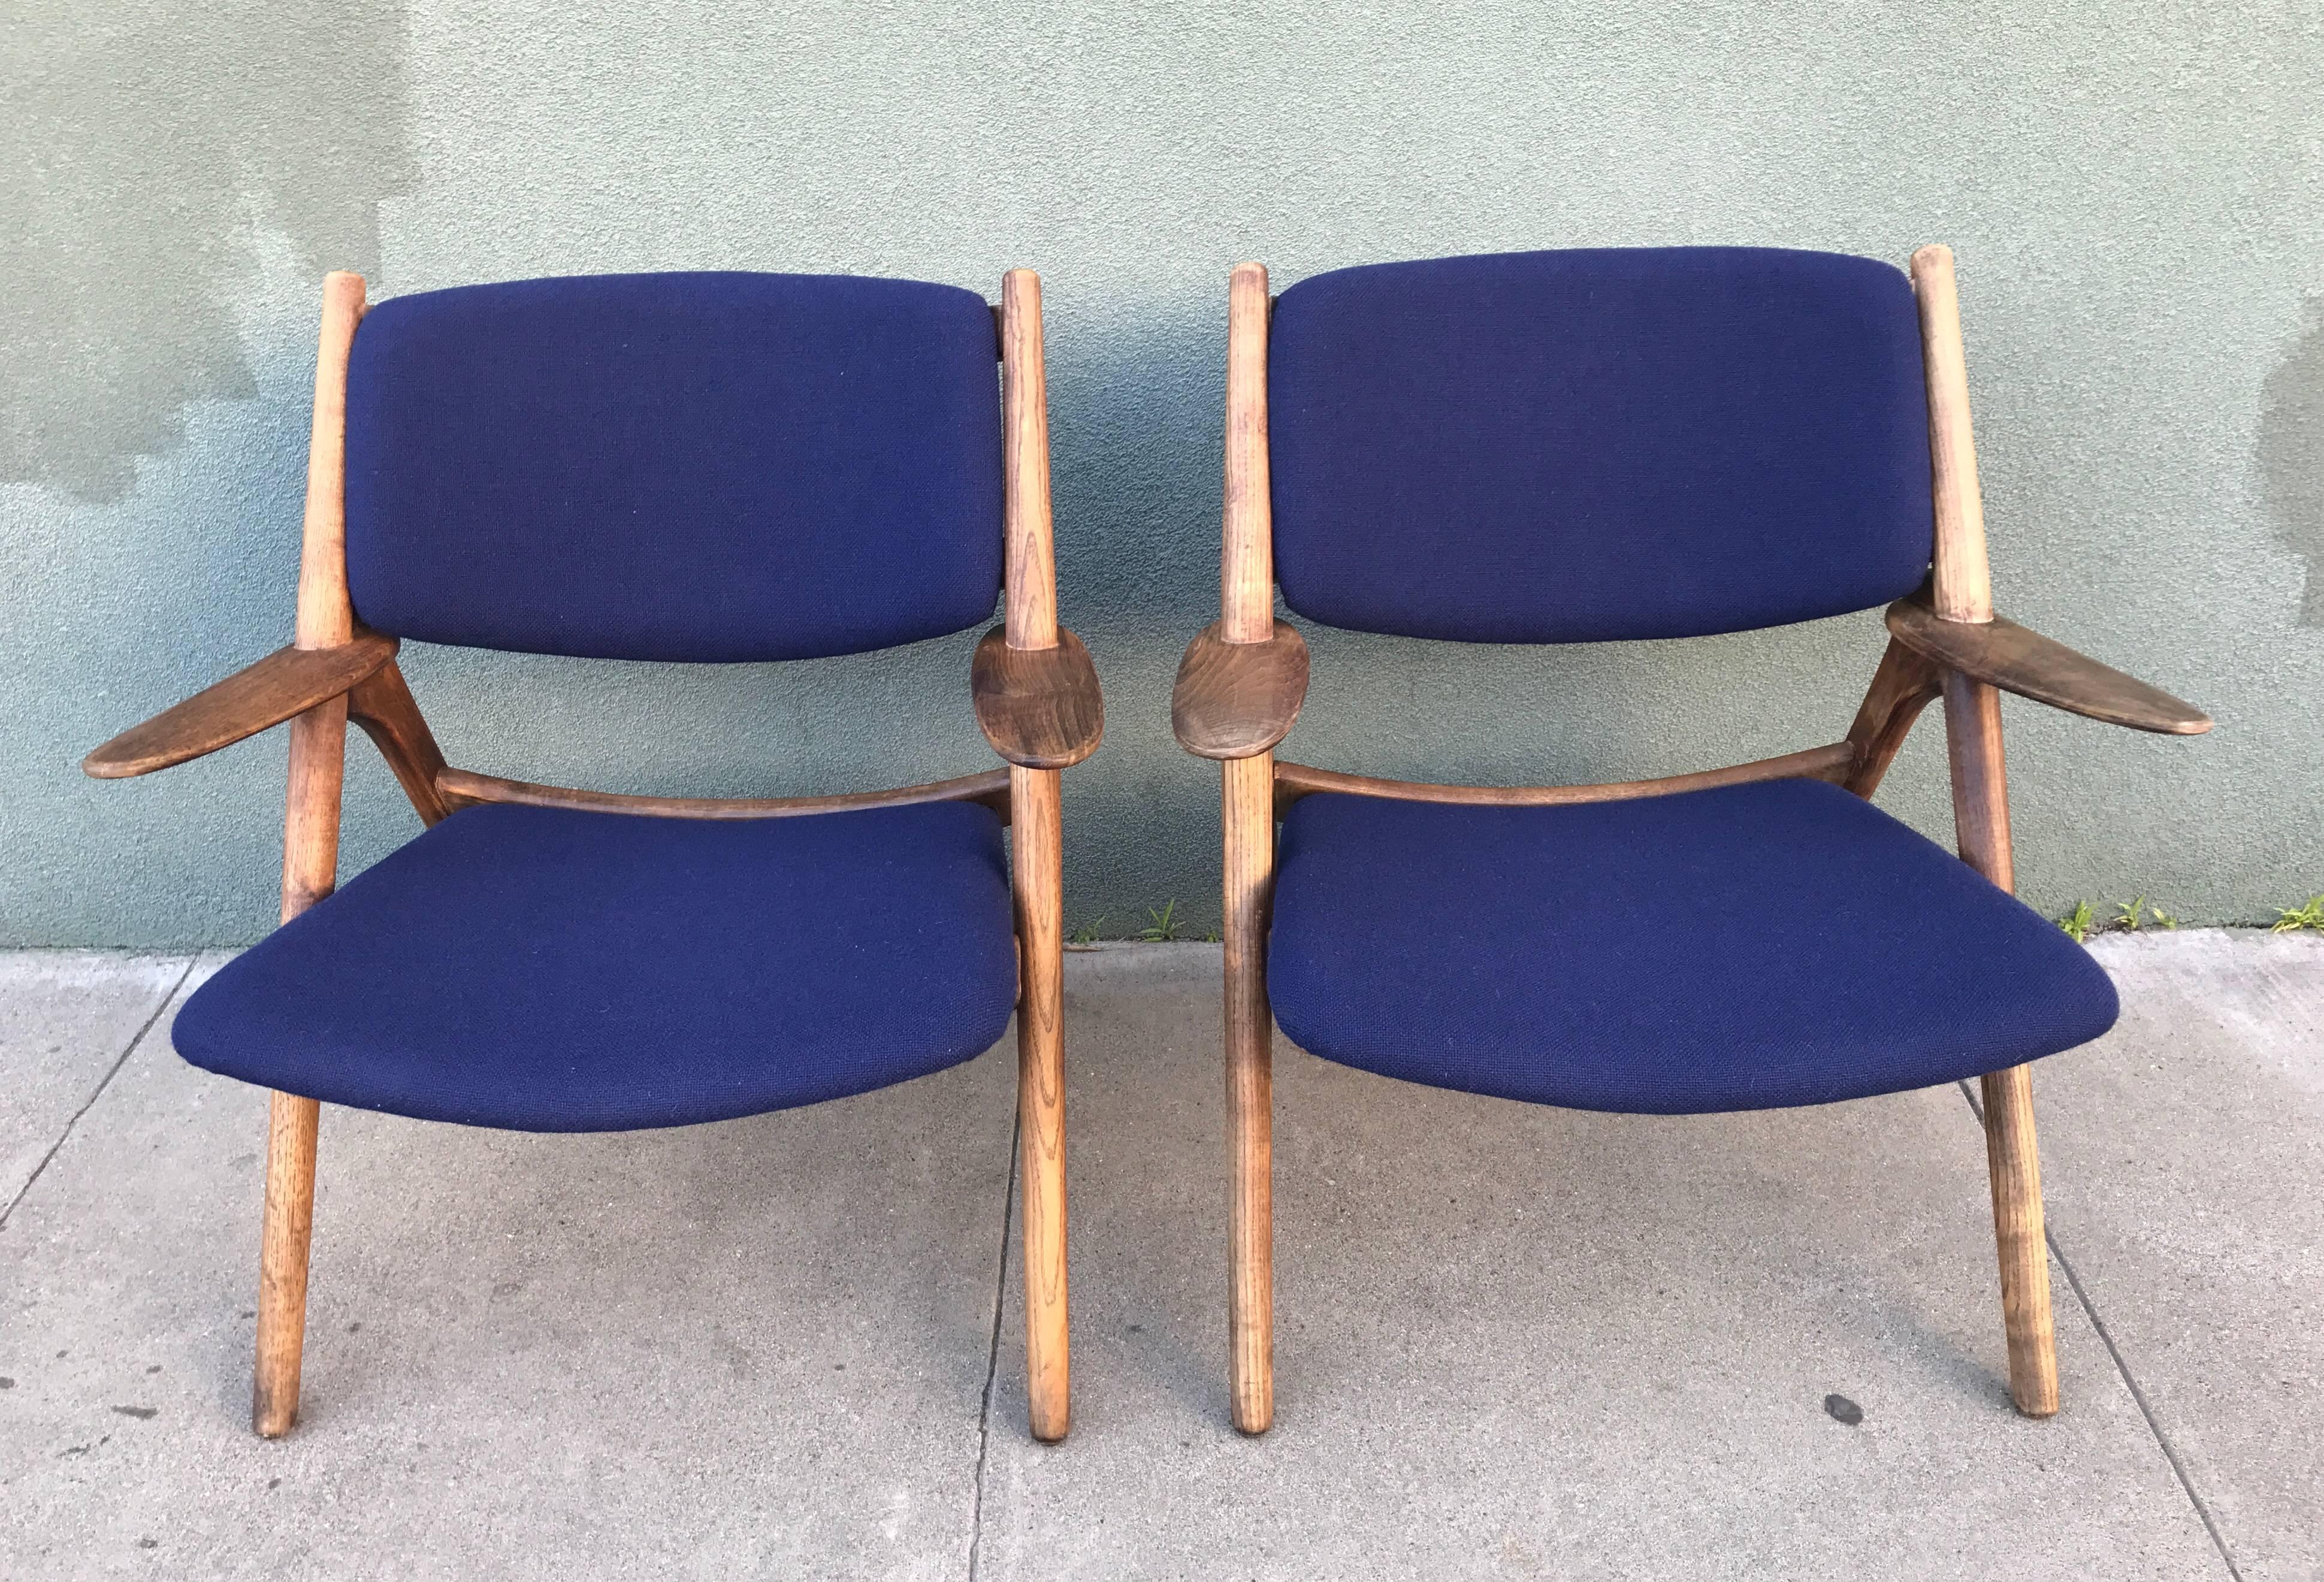 Beautiful pair of vintage walnut sawbuck lounge chairs, circa 1960s, Japan. Newly recovered in a dark blue Maharam fabric. Very comfortable wide seat and a great wood patina.